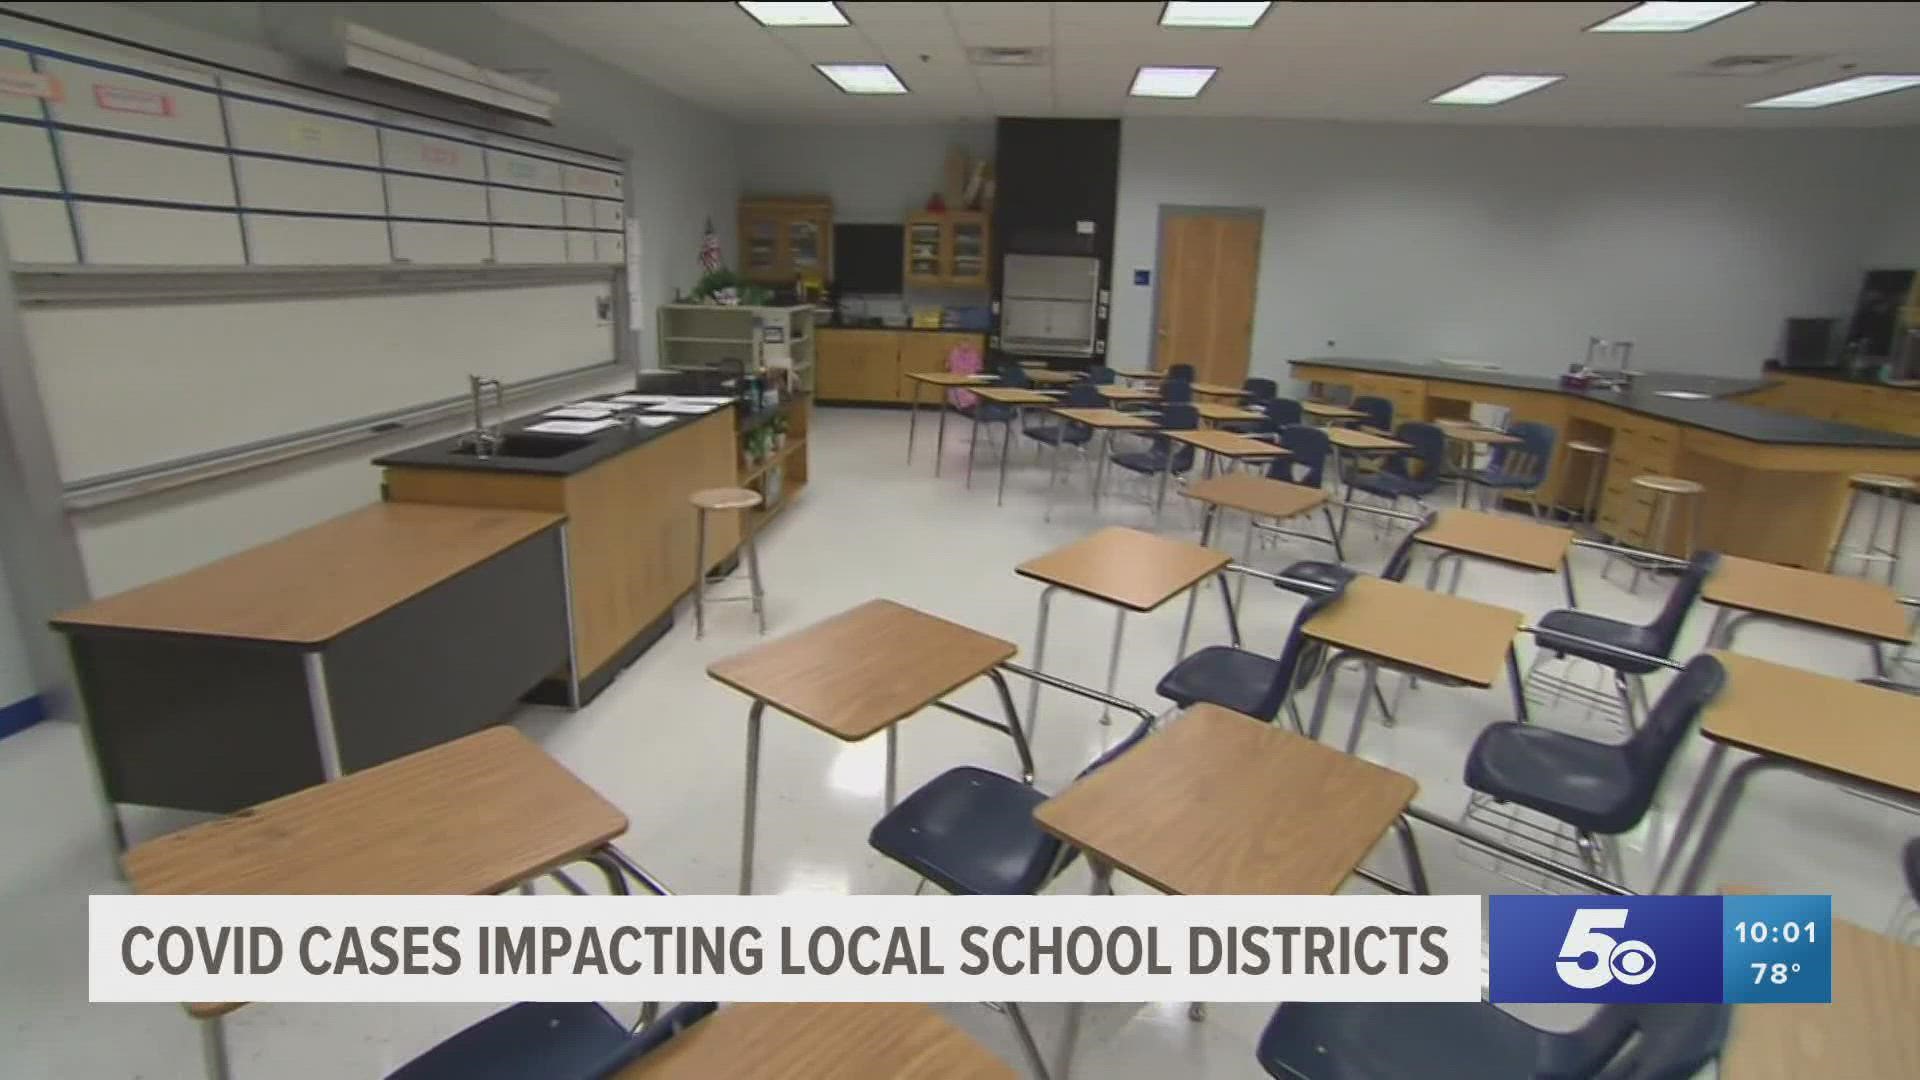 Students will switch to virtual learning from Aug. 24 through Sept. 6 while other school districts are looking for quarantining alternatives.